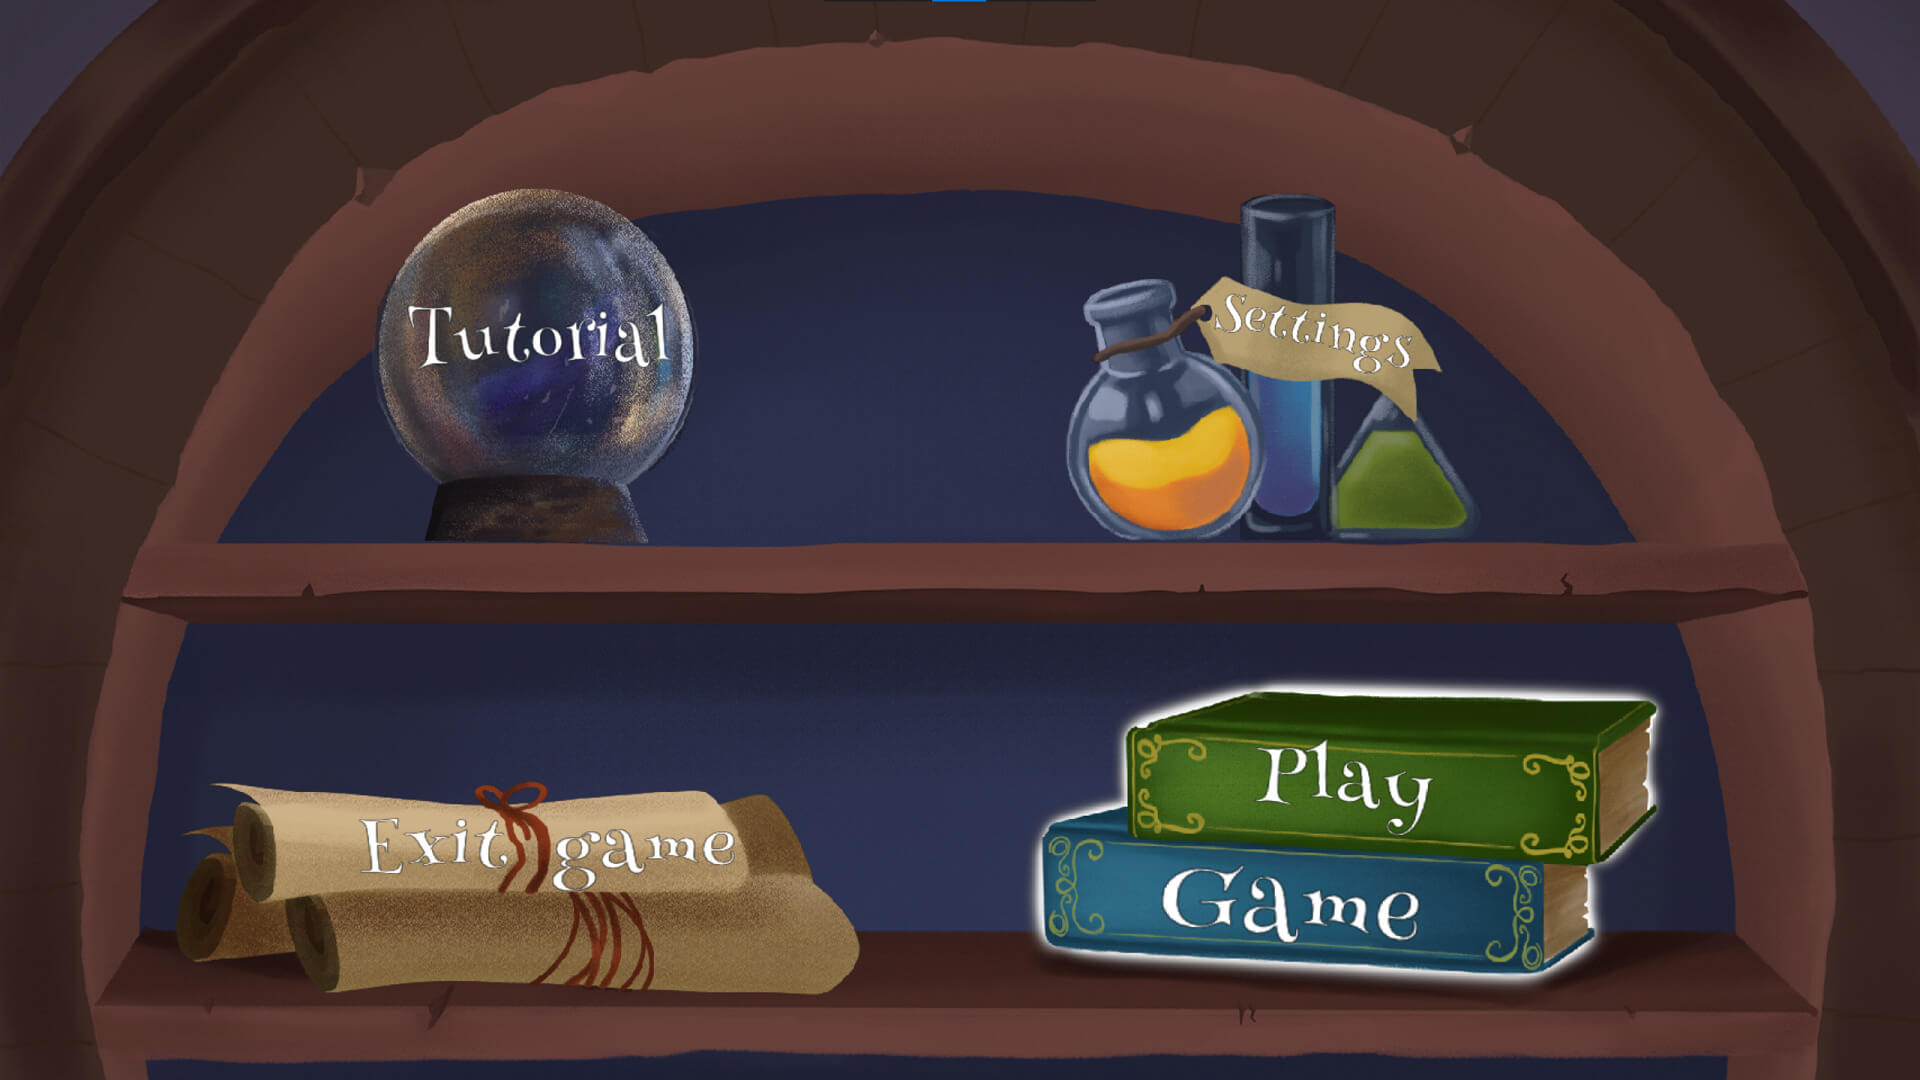 The game's 'menu' screen is displayed with various options located on objects such as a crystal ball, potions, rolled-up scrolls, and books.